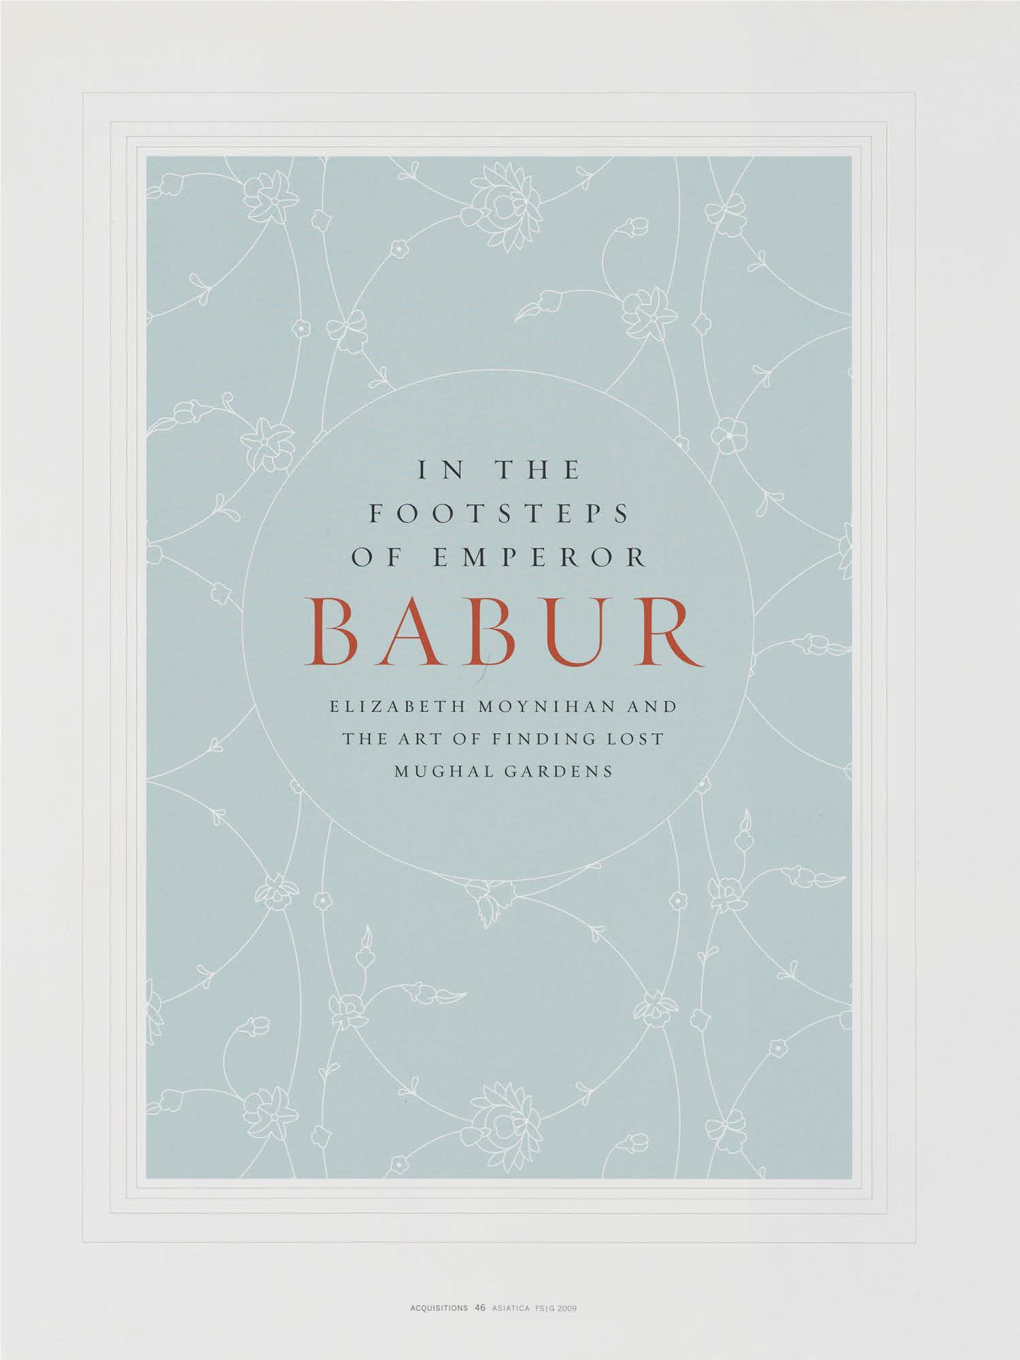 In the Footsteps of the Emperor Babur